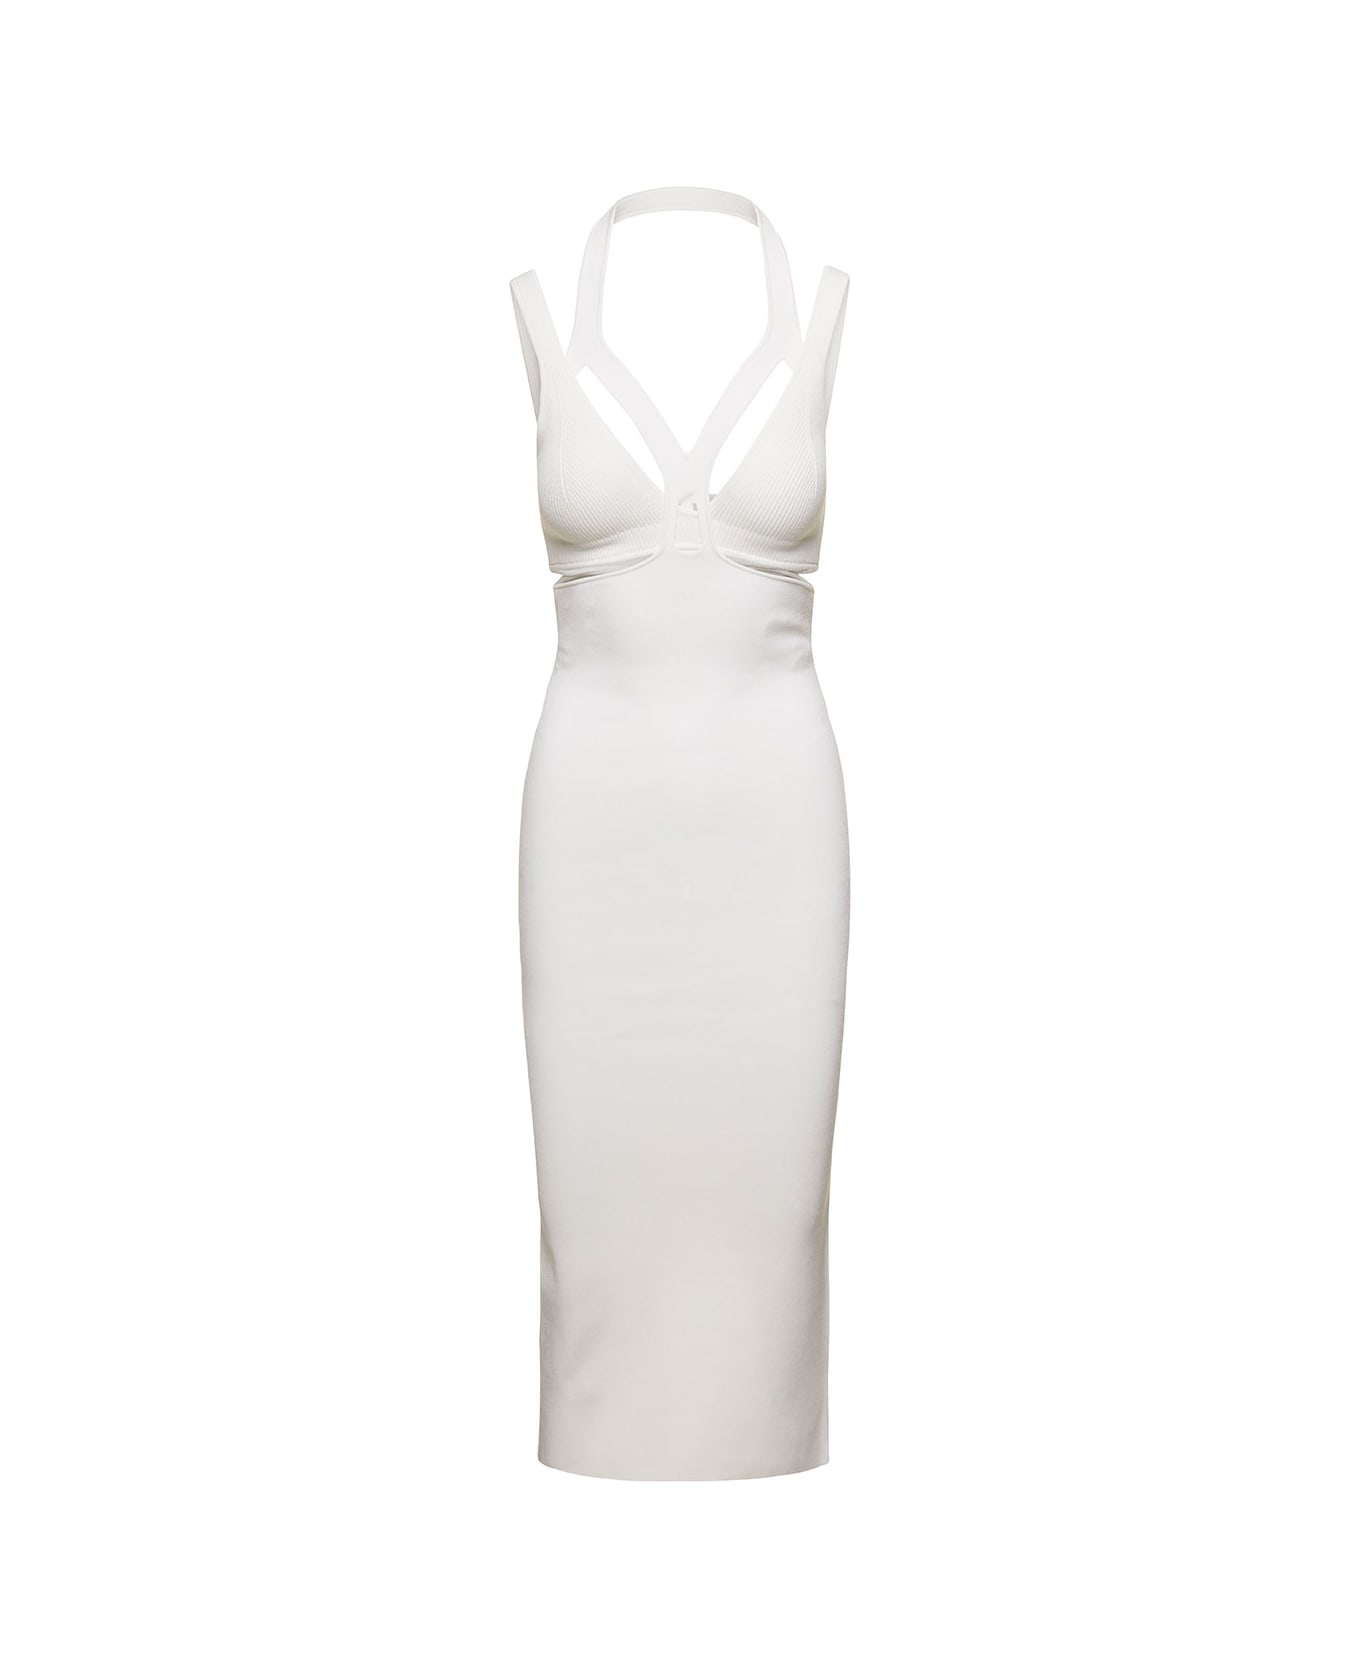 Dion Lee 'interlink' Midi White Dress With Cut-out Detail In Viscose Blend Woman - White ワンピース＆ドレス